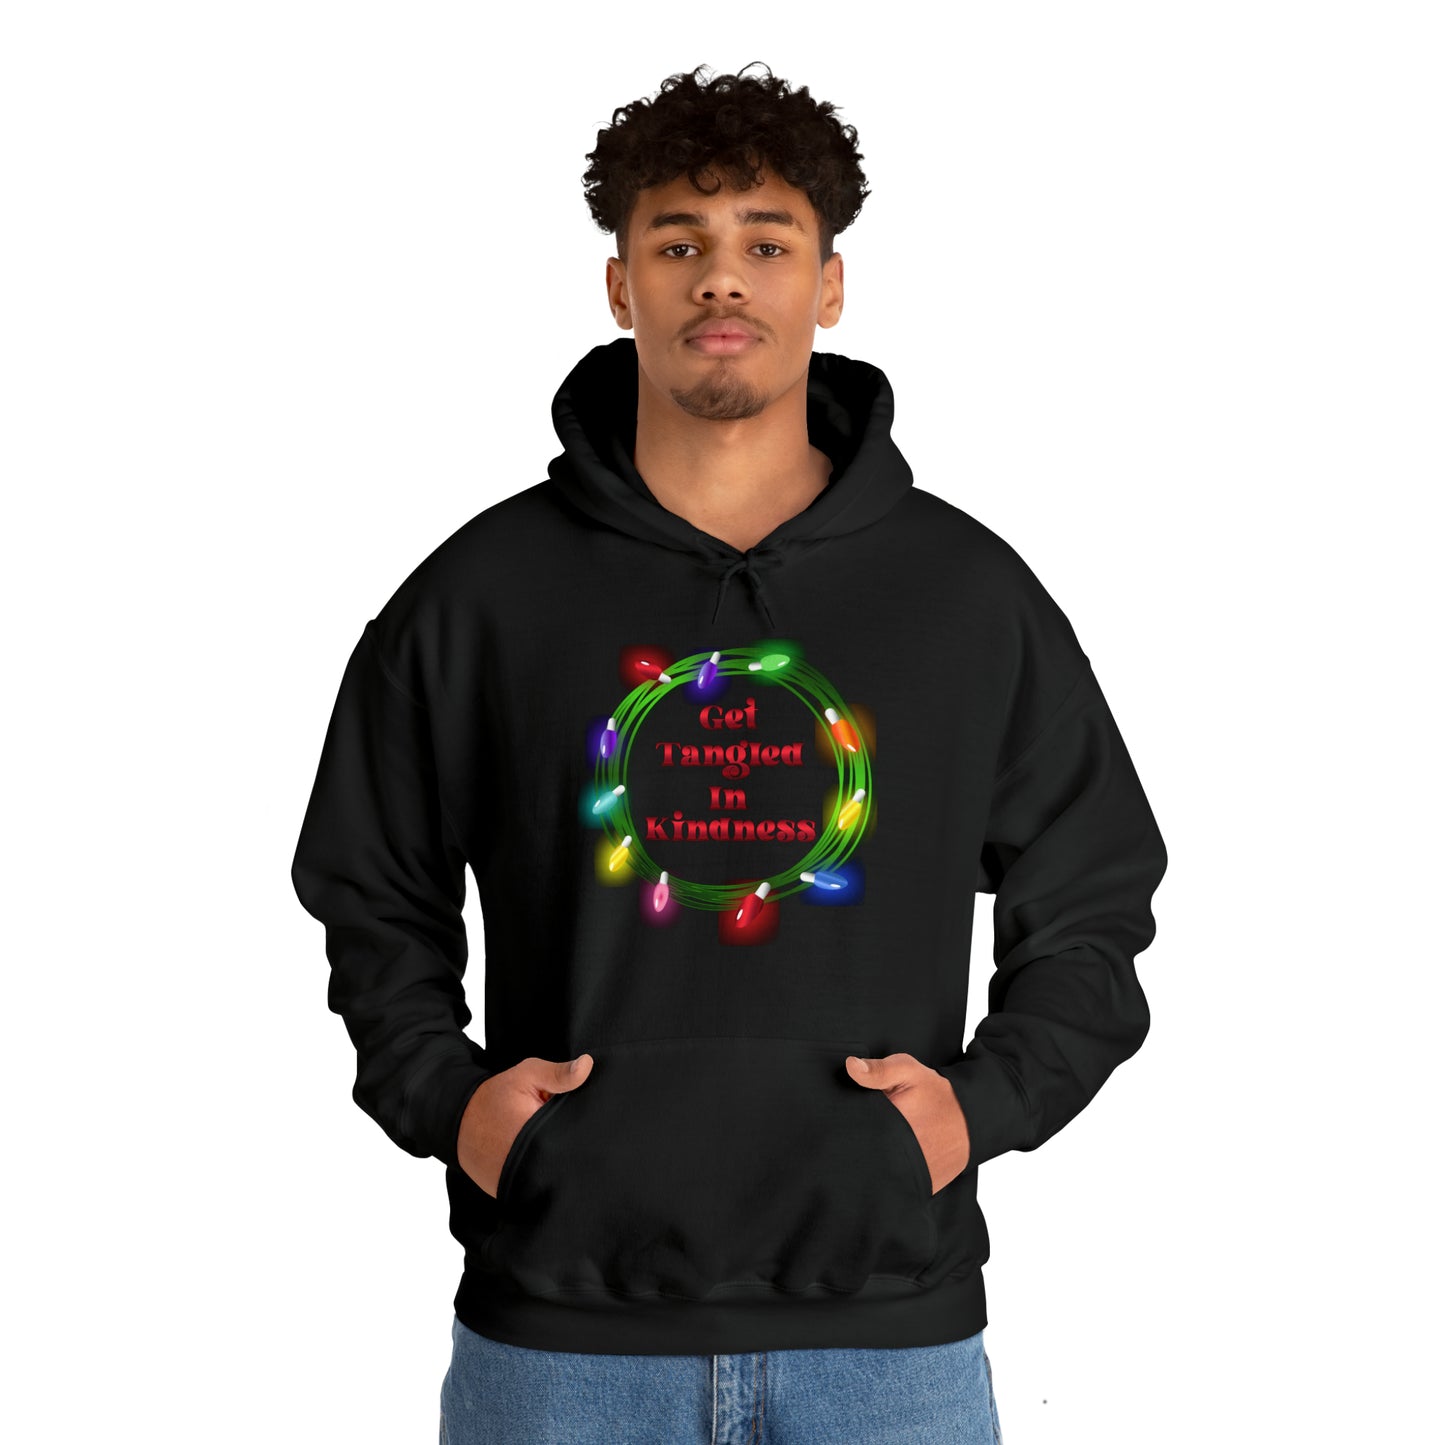 Get Tangled In Kindness Hoodie